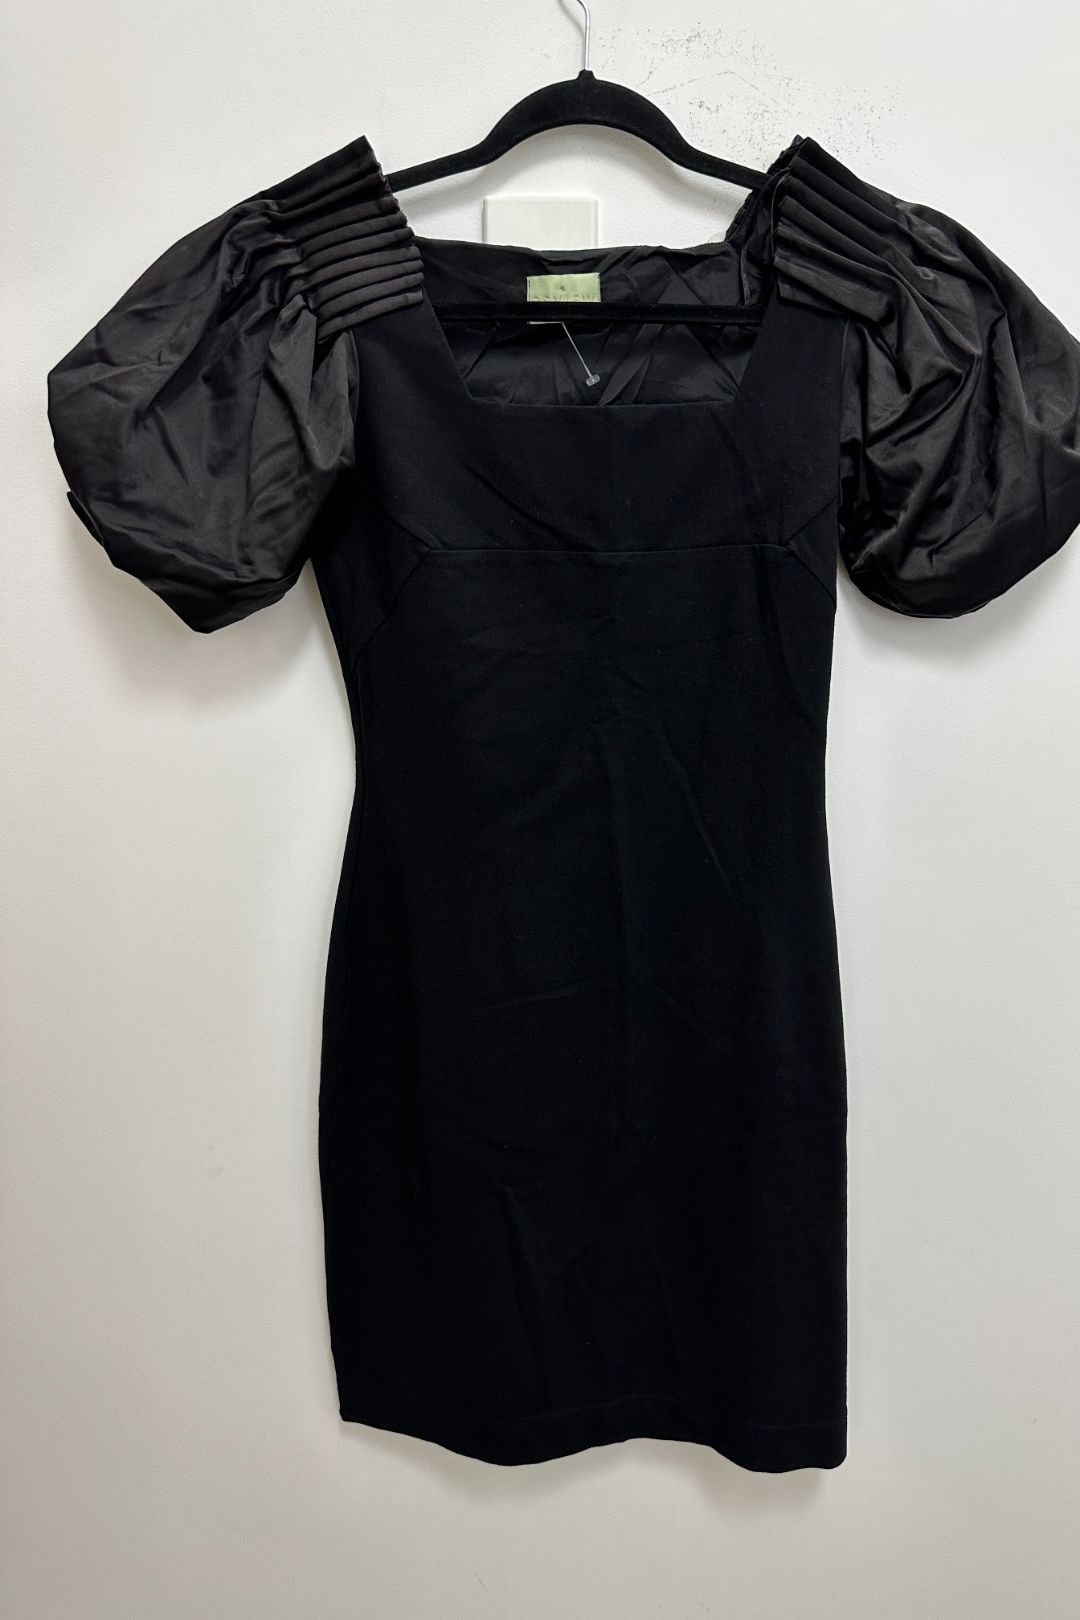 Review - Black Puff Sleeve Dress